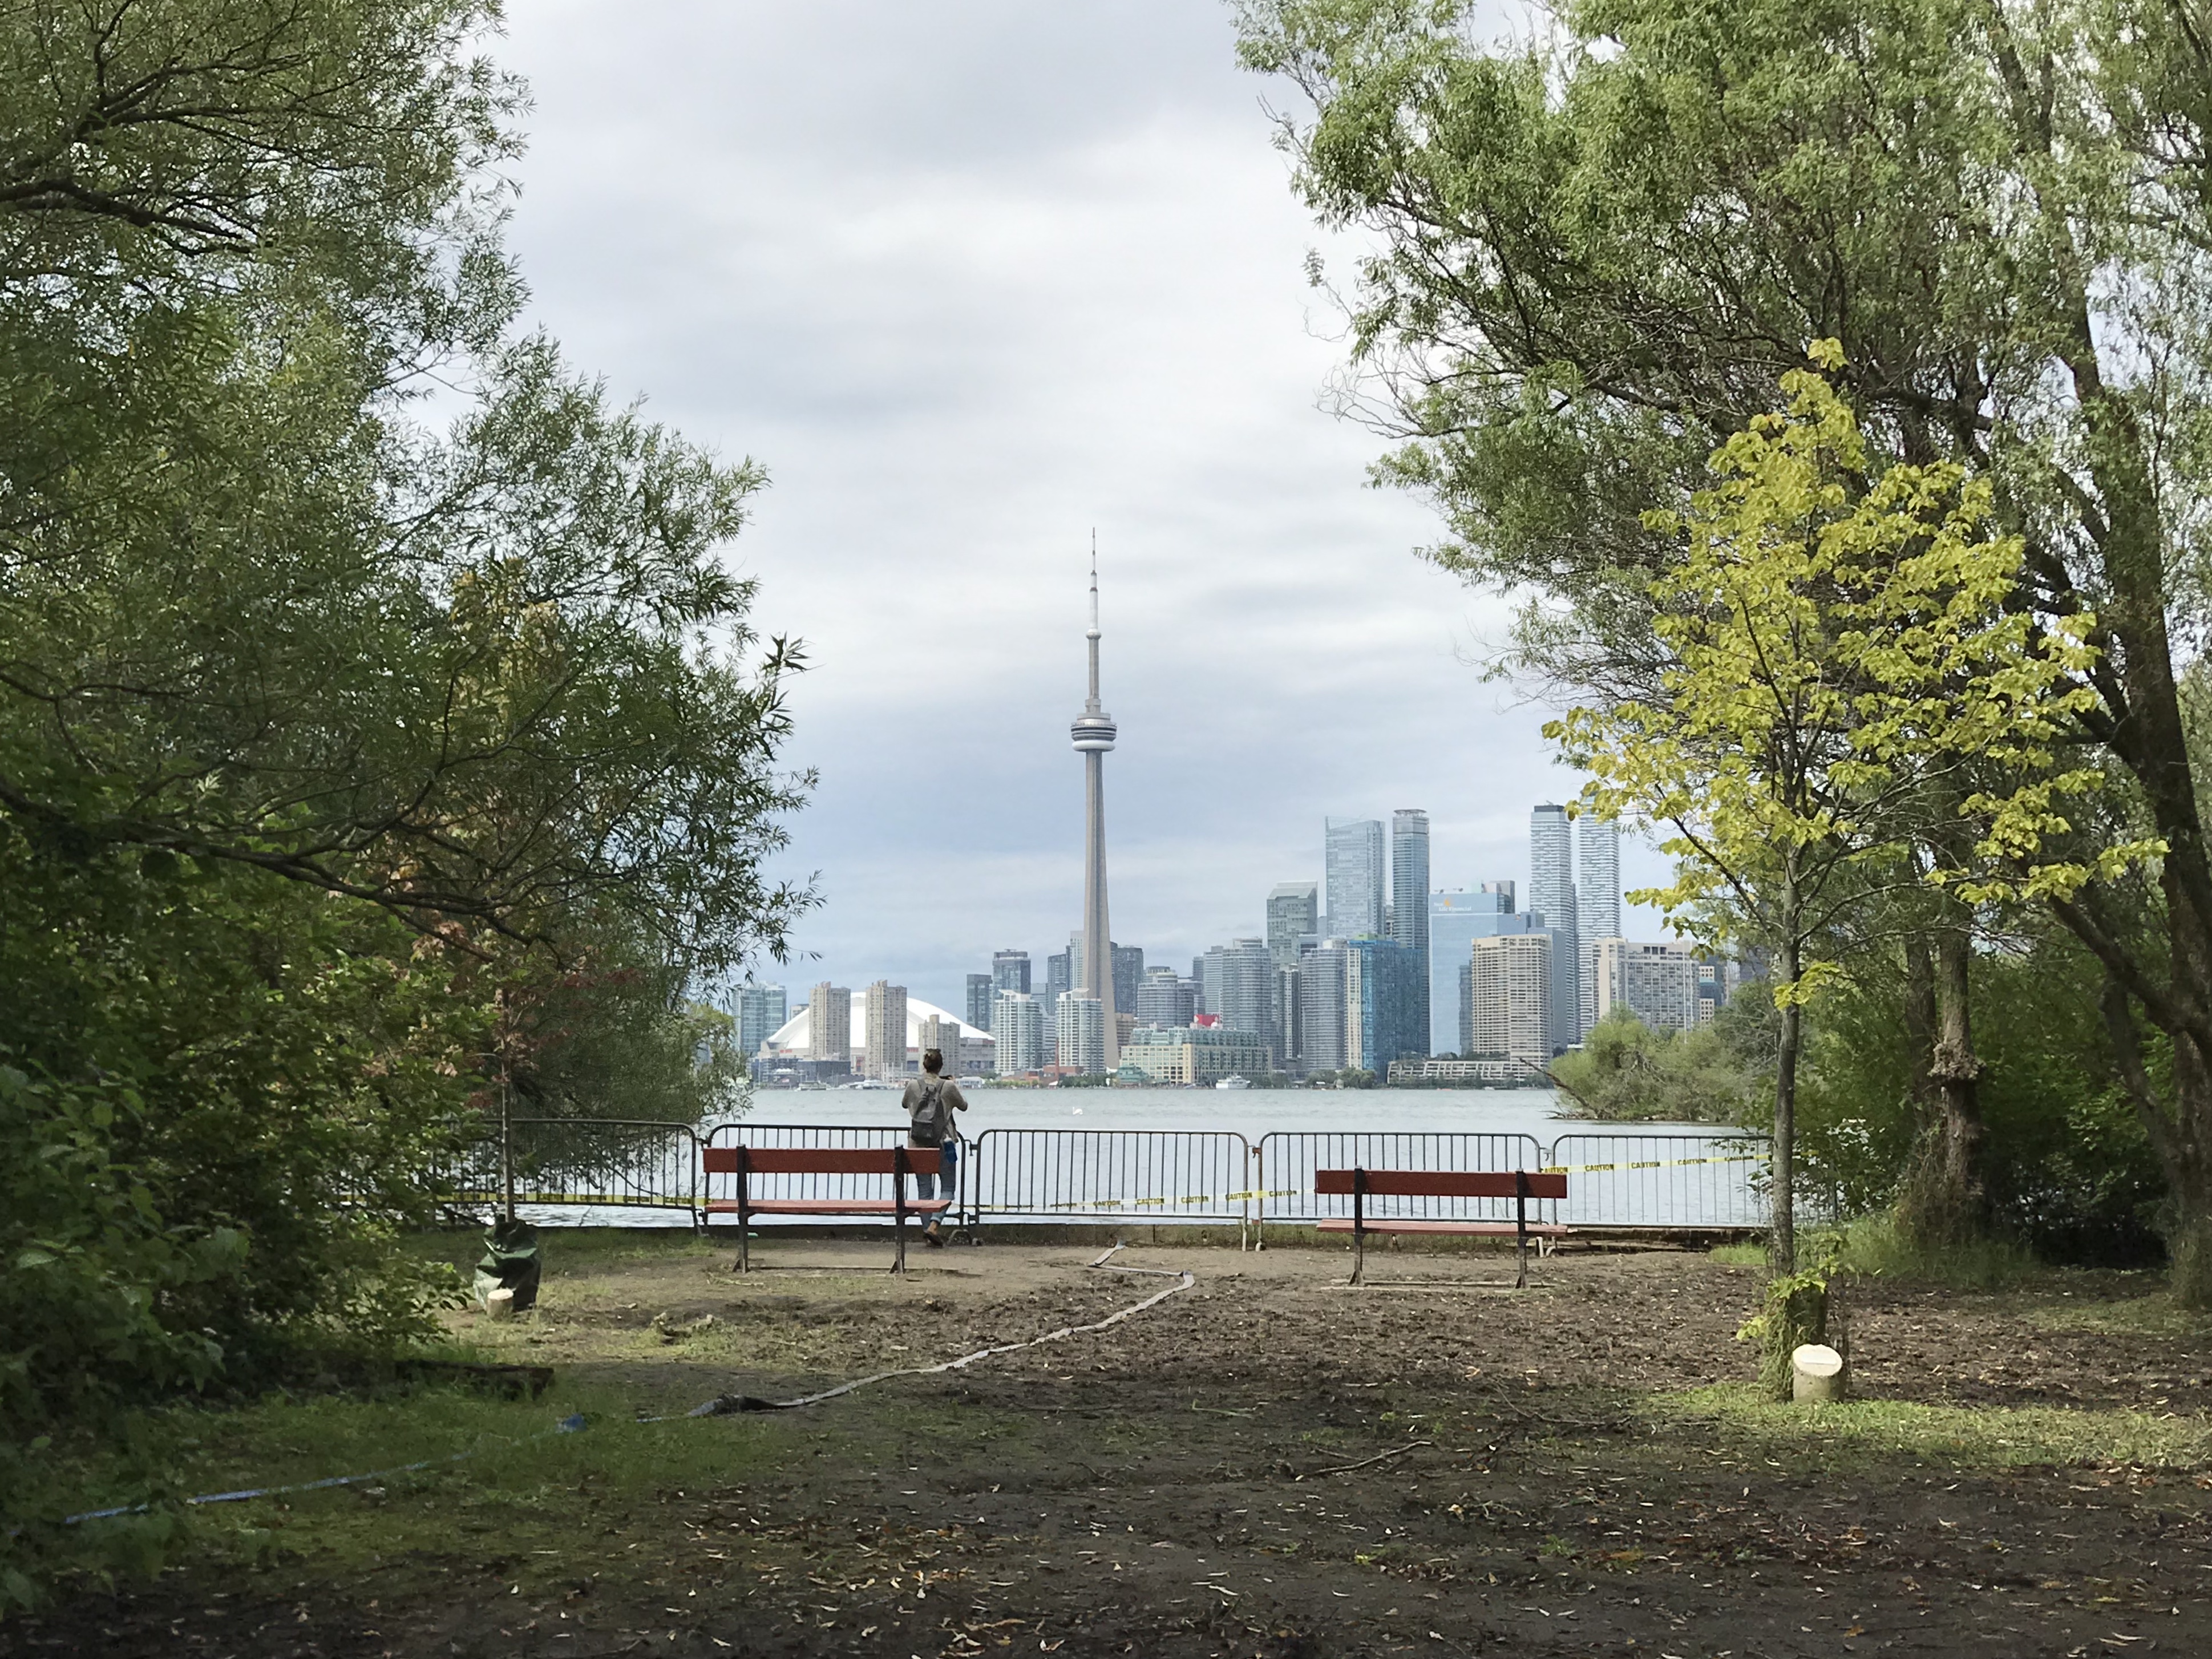 This photo was taken just outside of Toronto, inside Toronto Island Park.